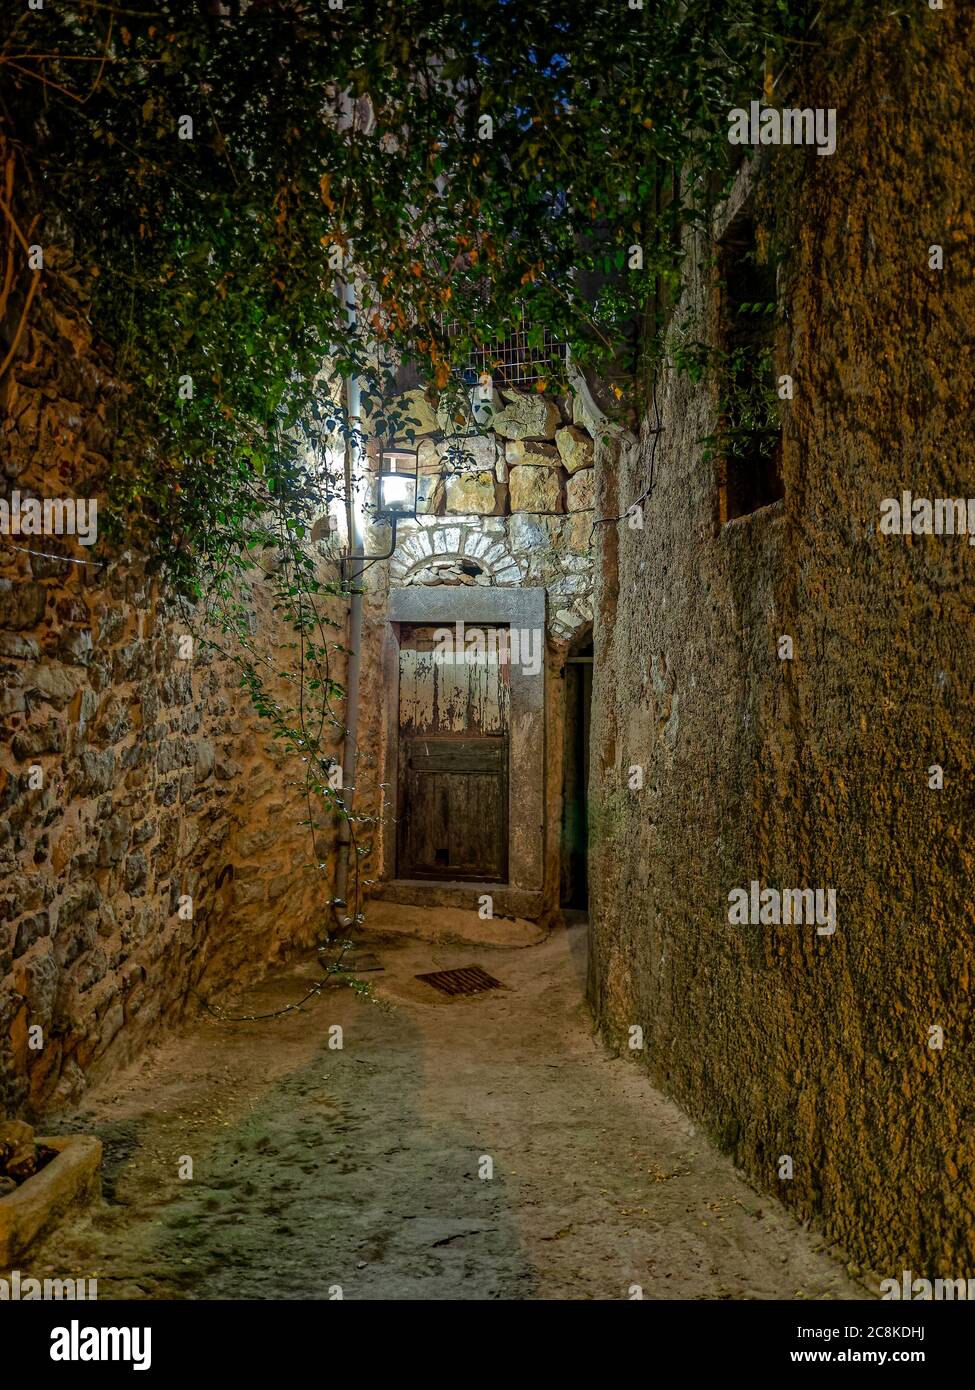 An illuminated dead end in Mesta, one of the most beautiful villages on Chios island. Its elaborate urban texture gives the impression of a labyrinth. Stock Photo